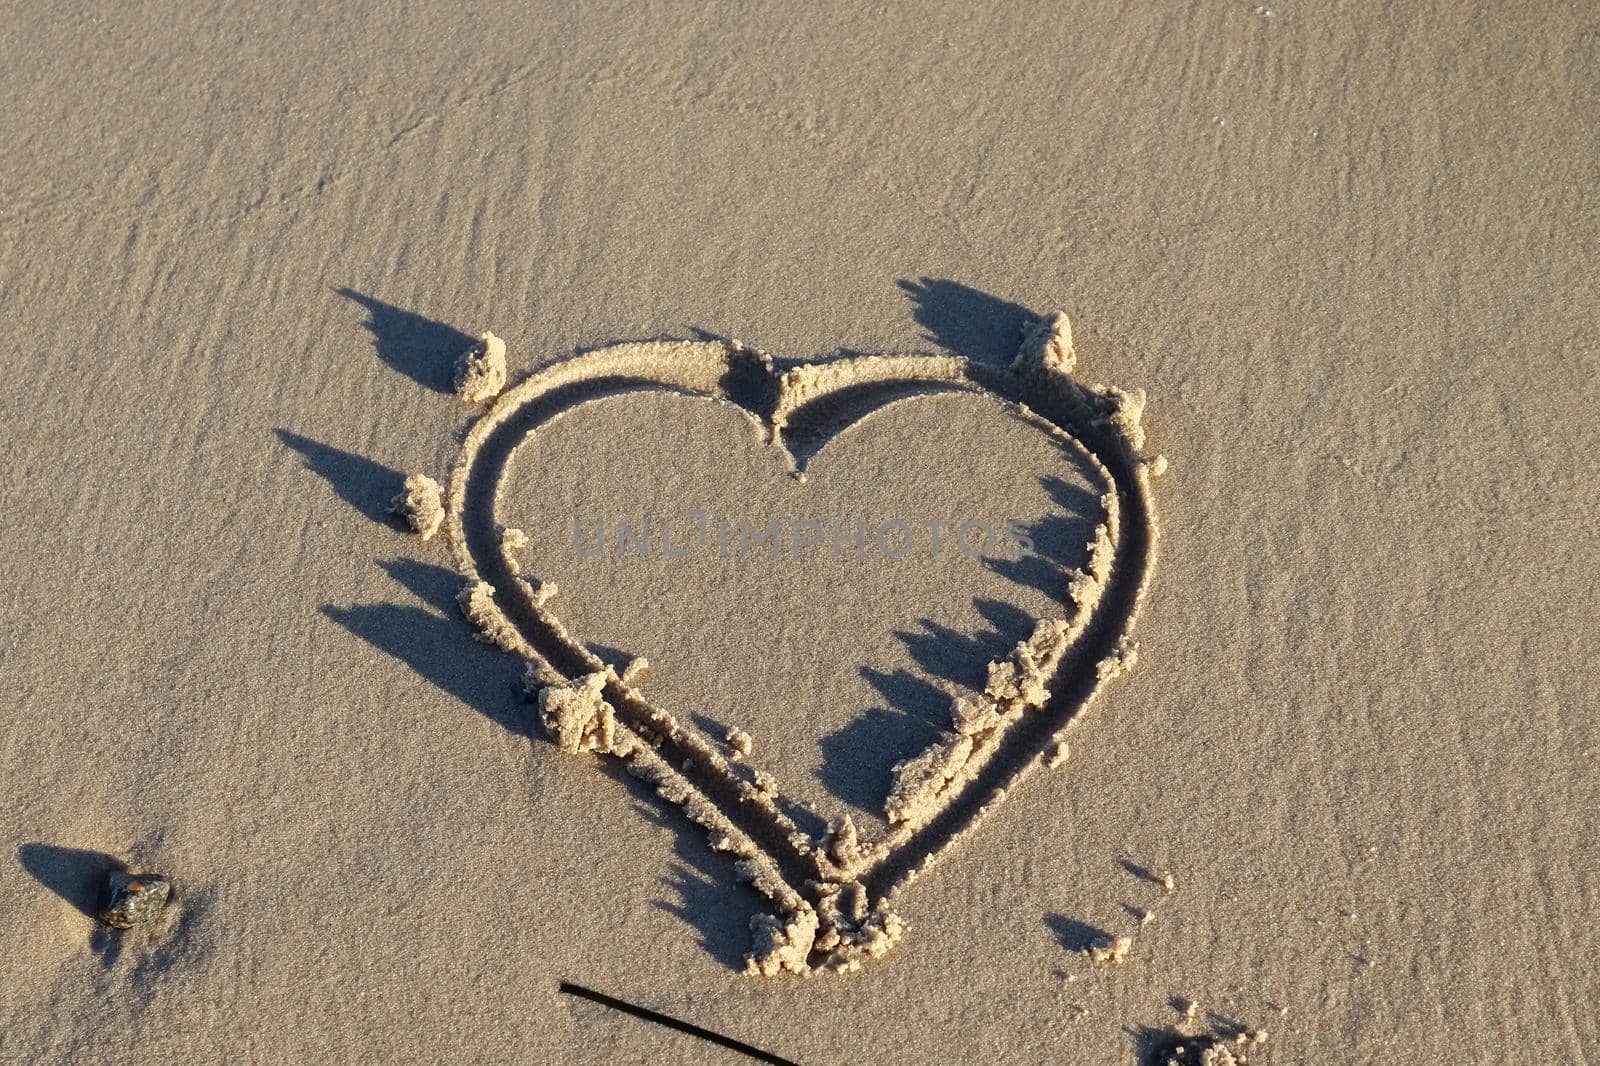 A beautiful heart shape painted into the sand of a baltic sea beach with some water waves